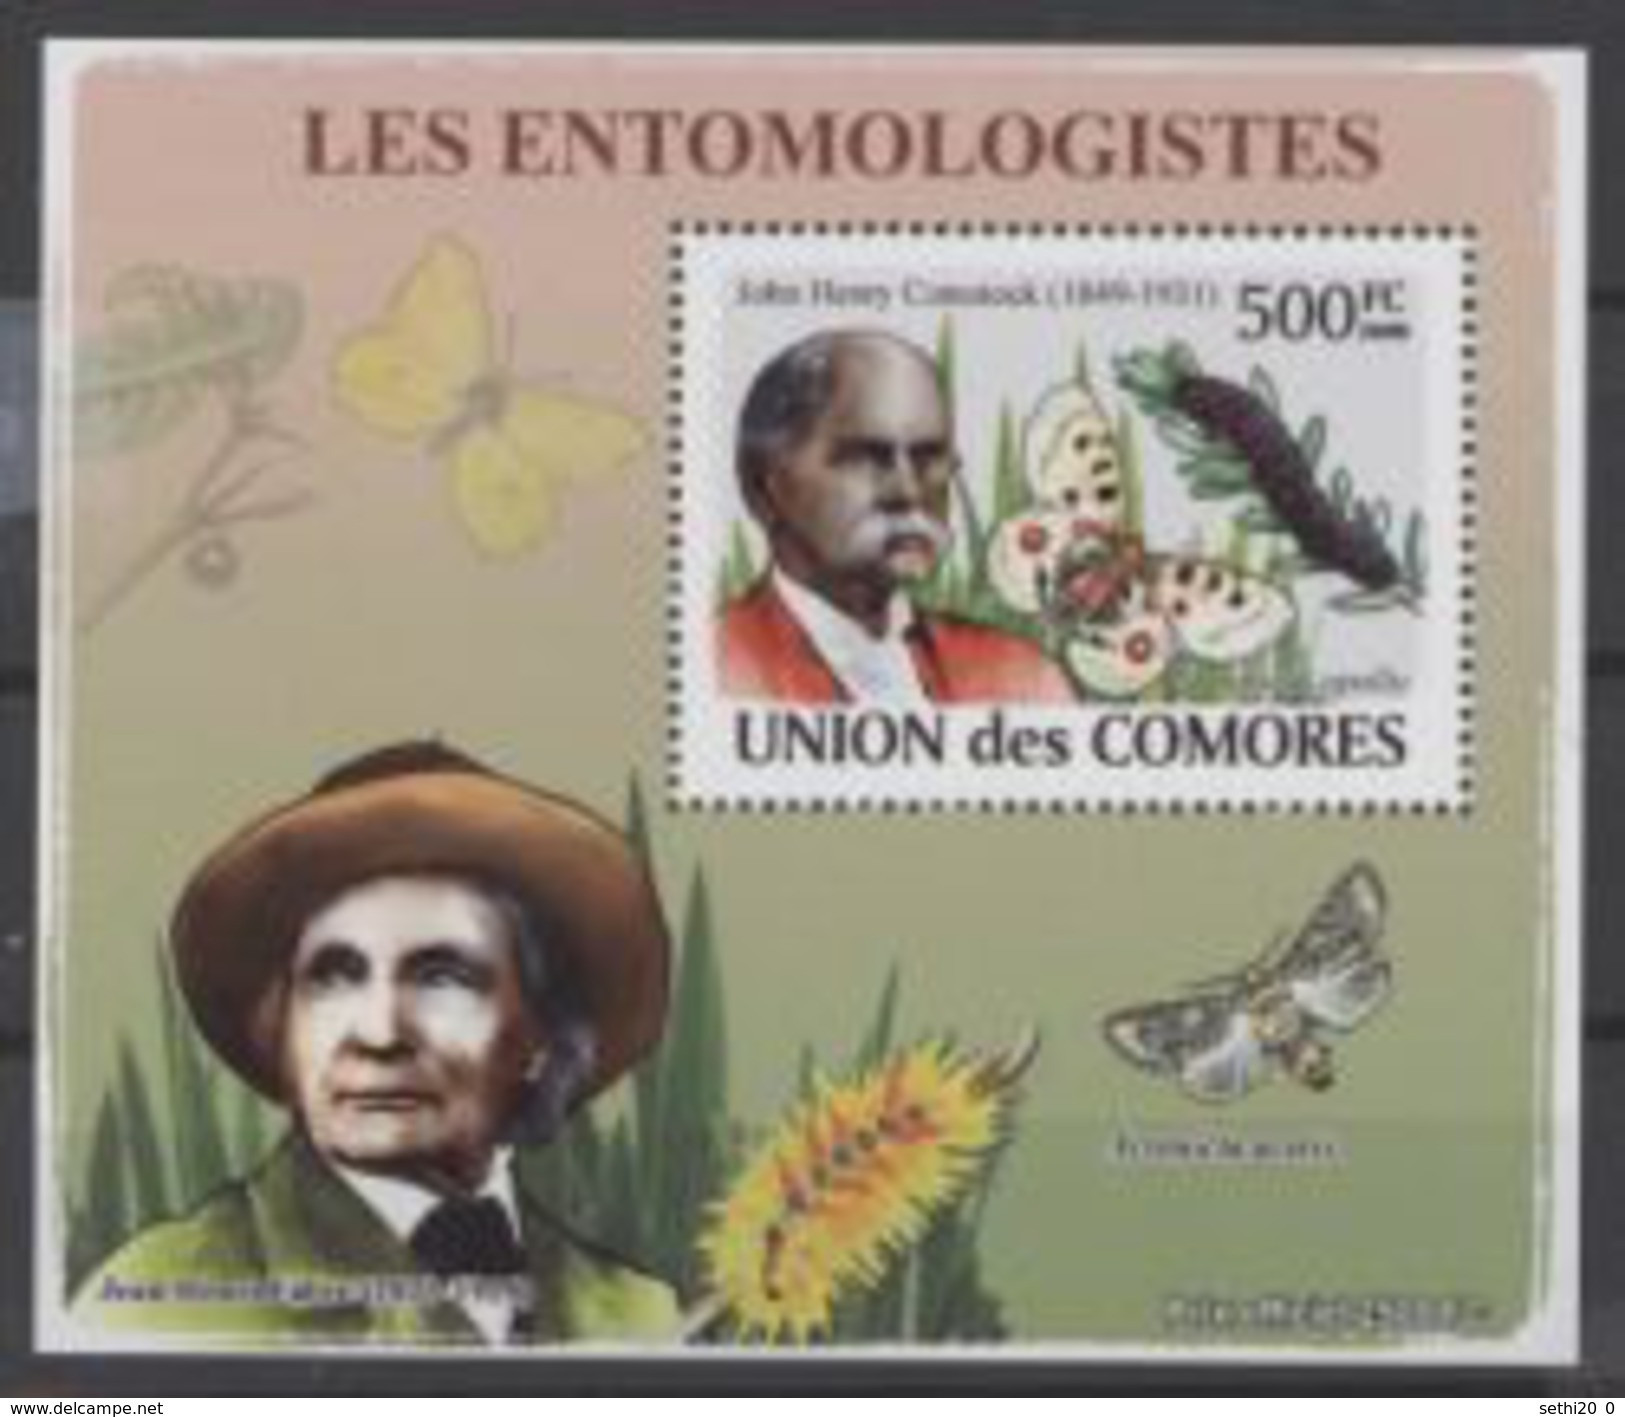 Comores John Henry COMSTOCK Jean Henri FABRE  On Margin Entomologists Butterfly Papillon  BF Luxe Perf - Papillons